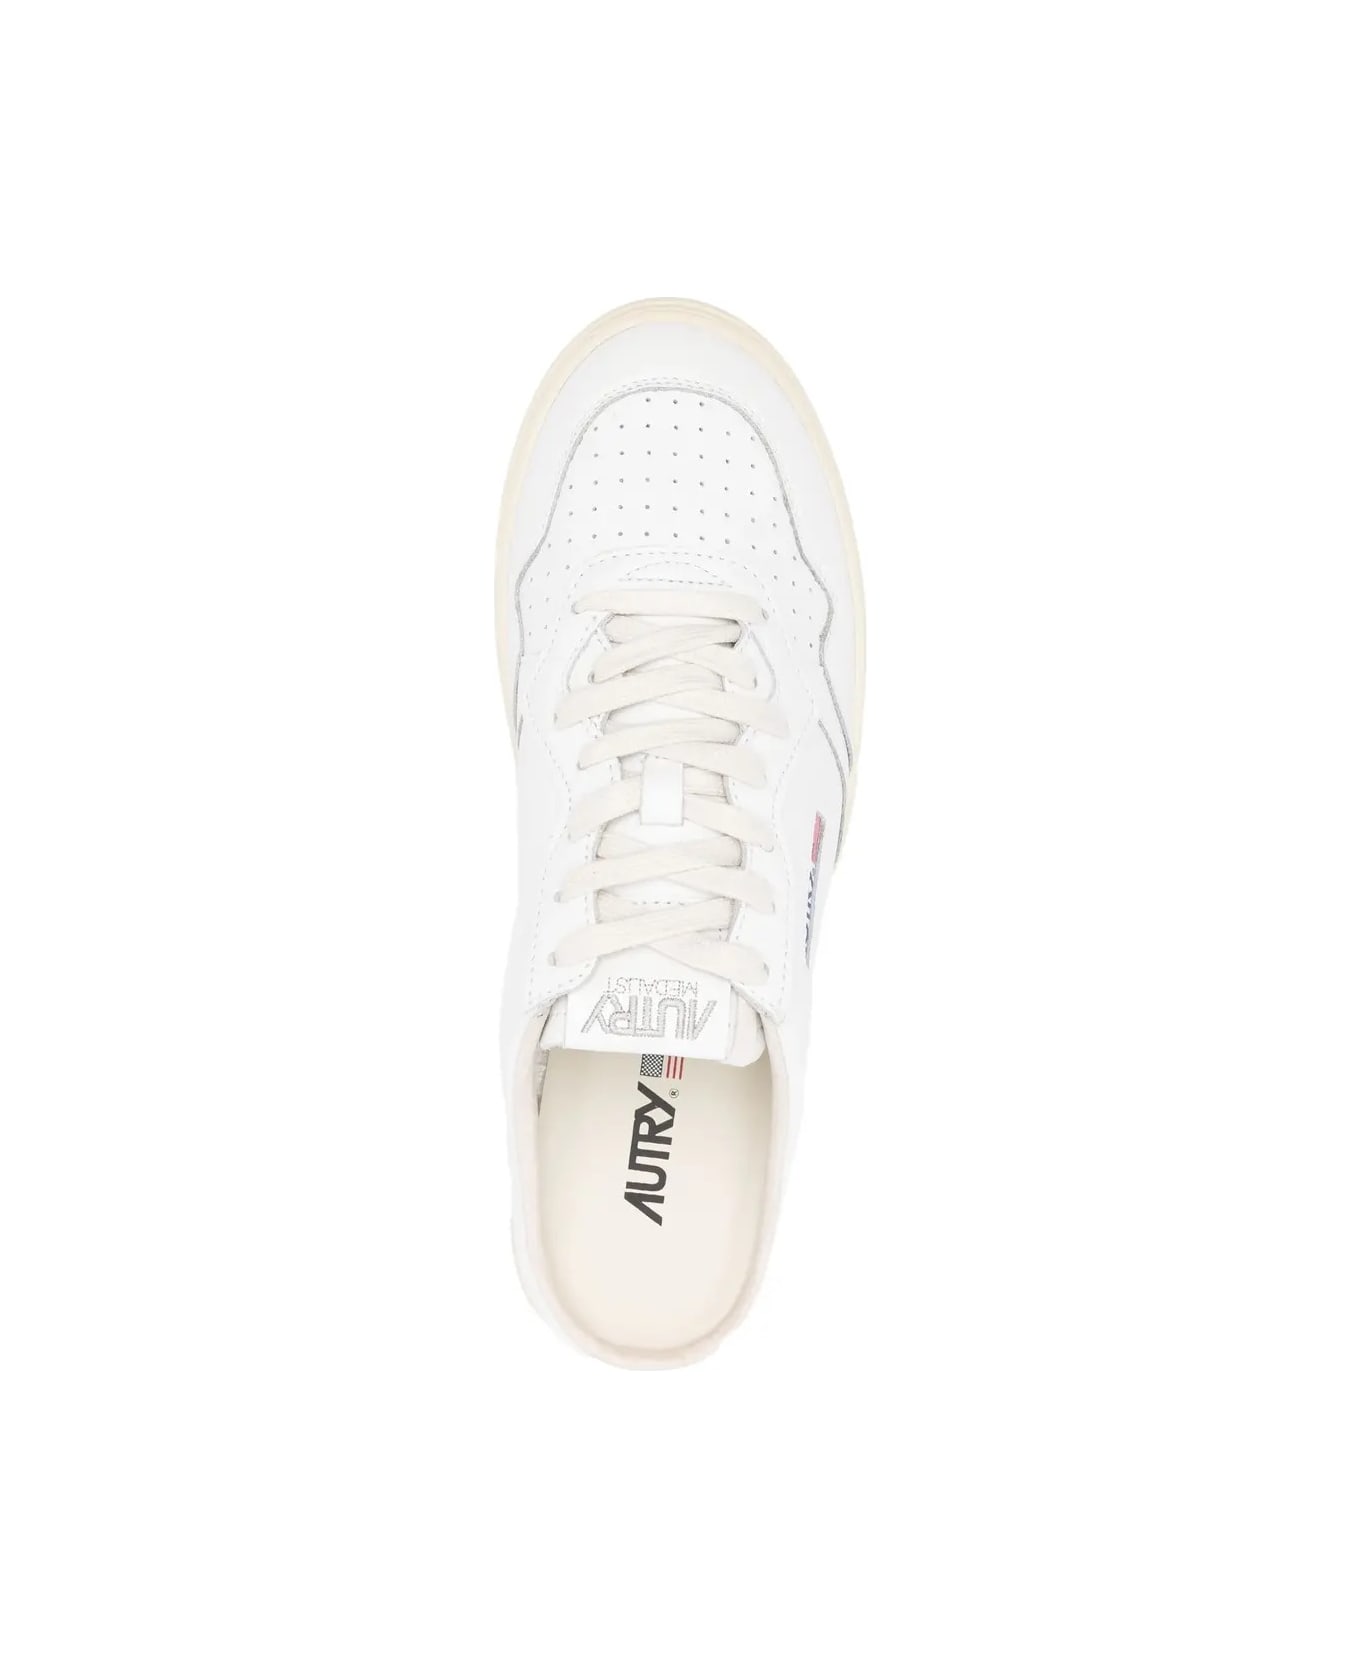 Autry White Medalist Mule Sneakers - White スニーカー